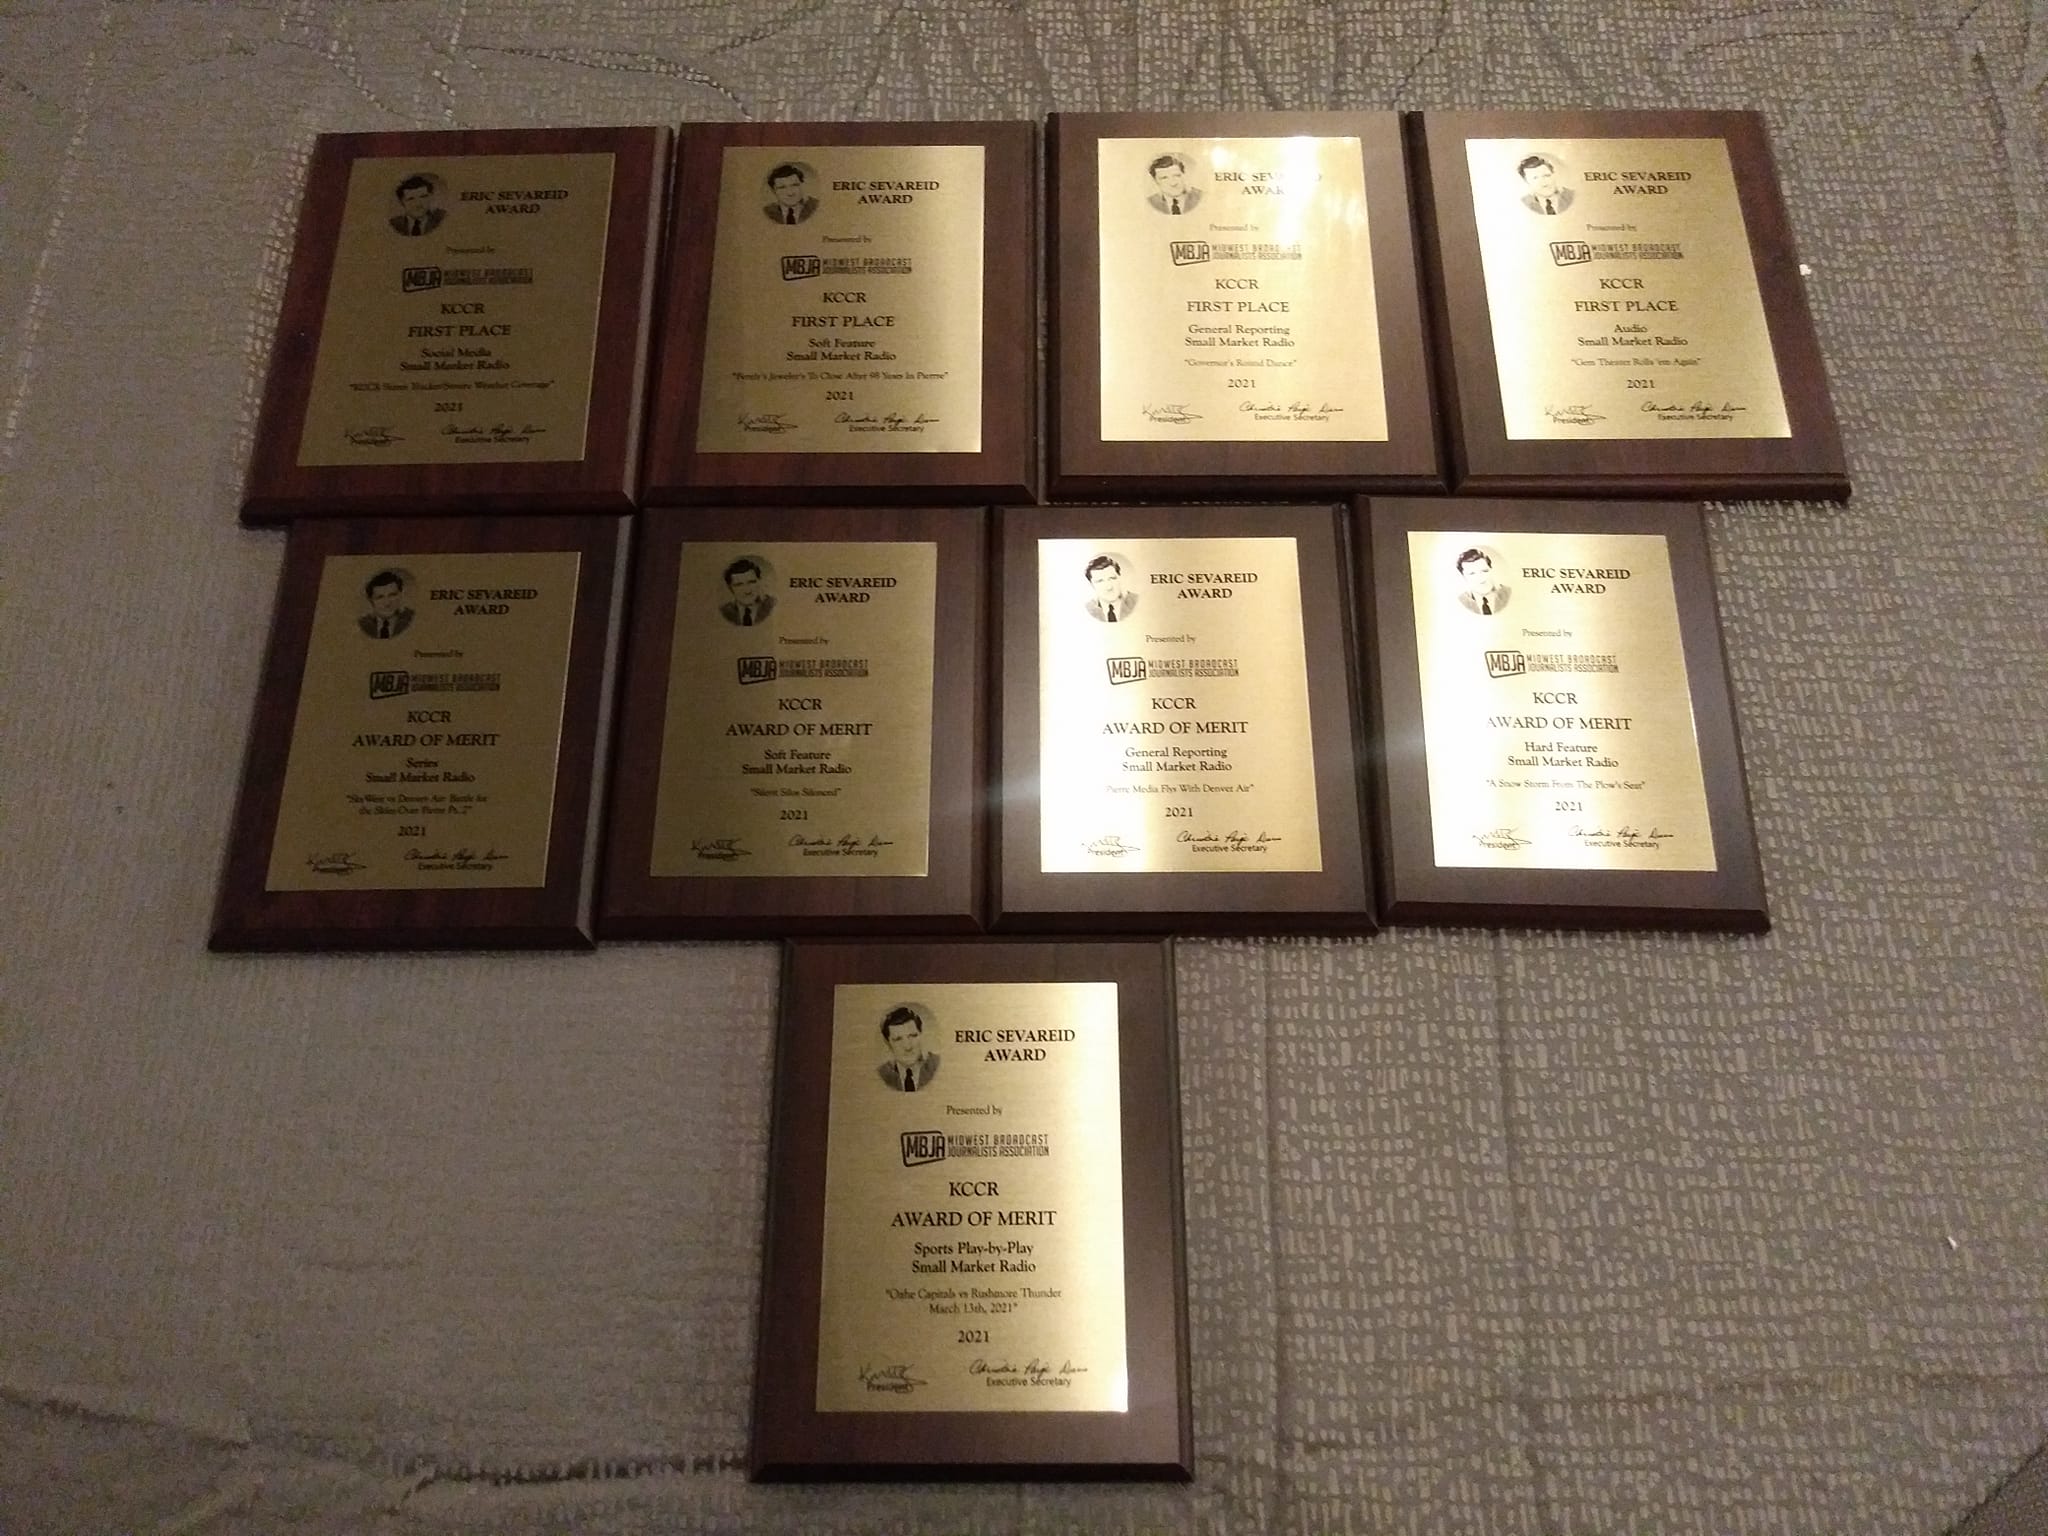 Riverfront Broadcasting Recognized Again For  Award Winning News And Sports With 9 Eric Sevareid Awards